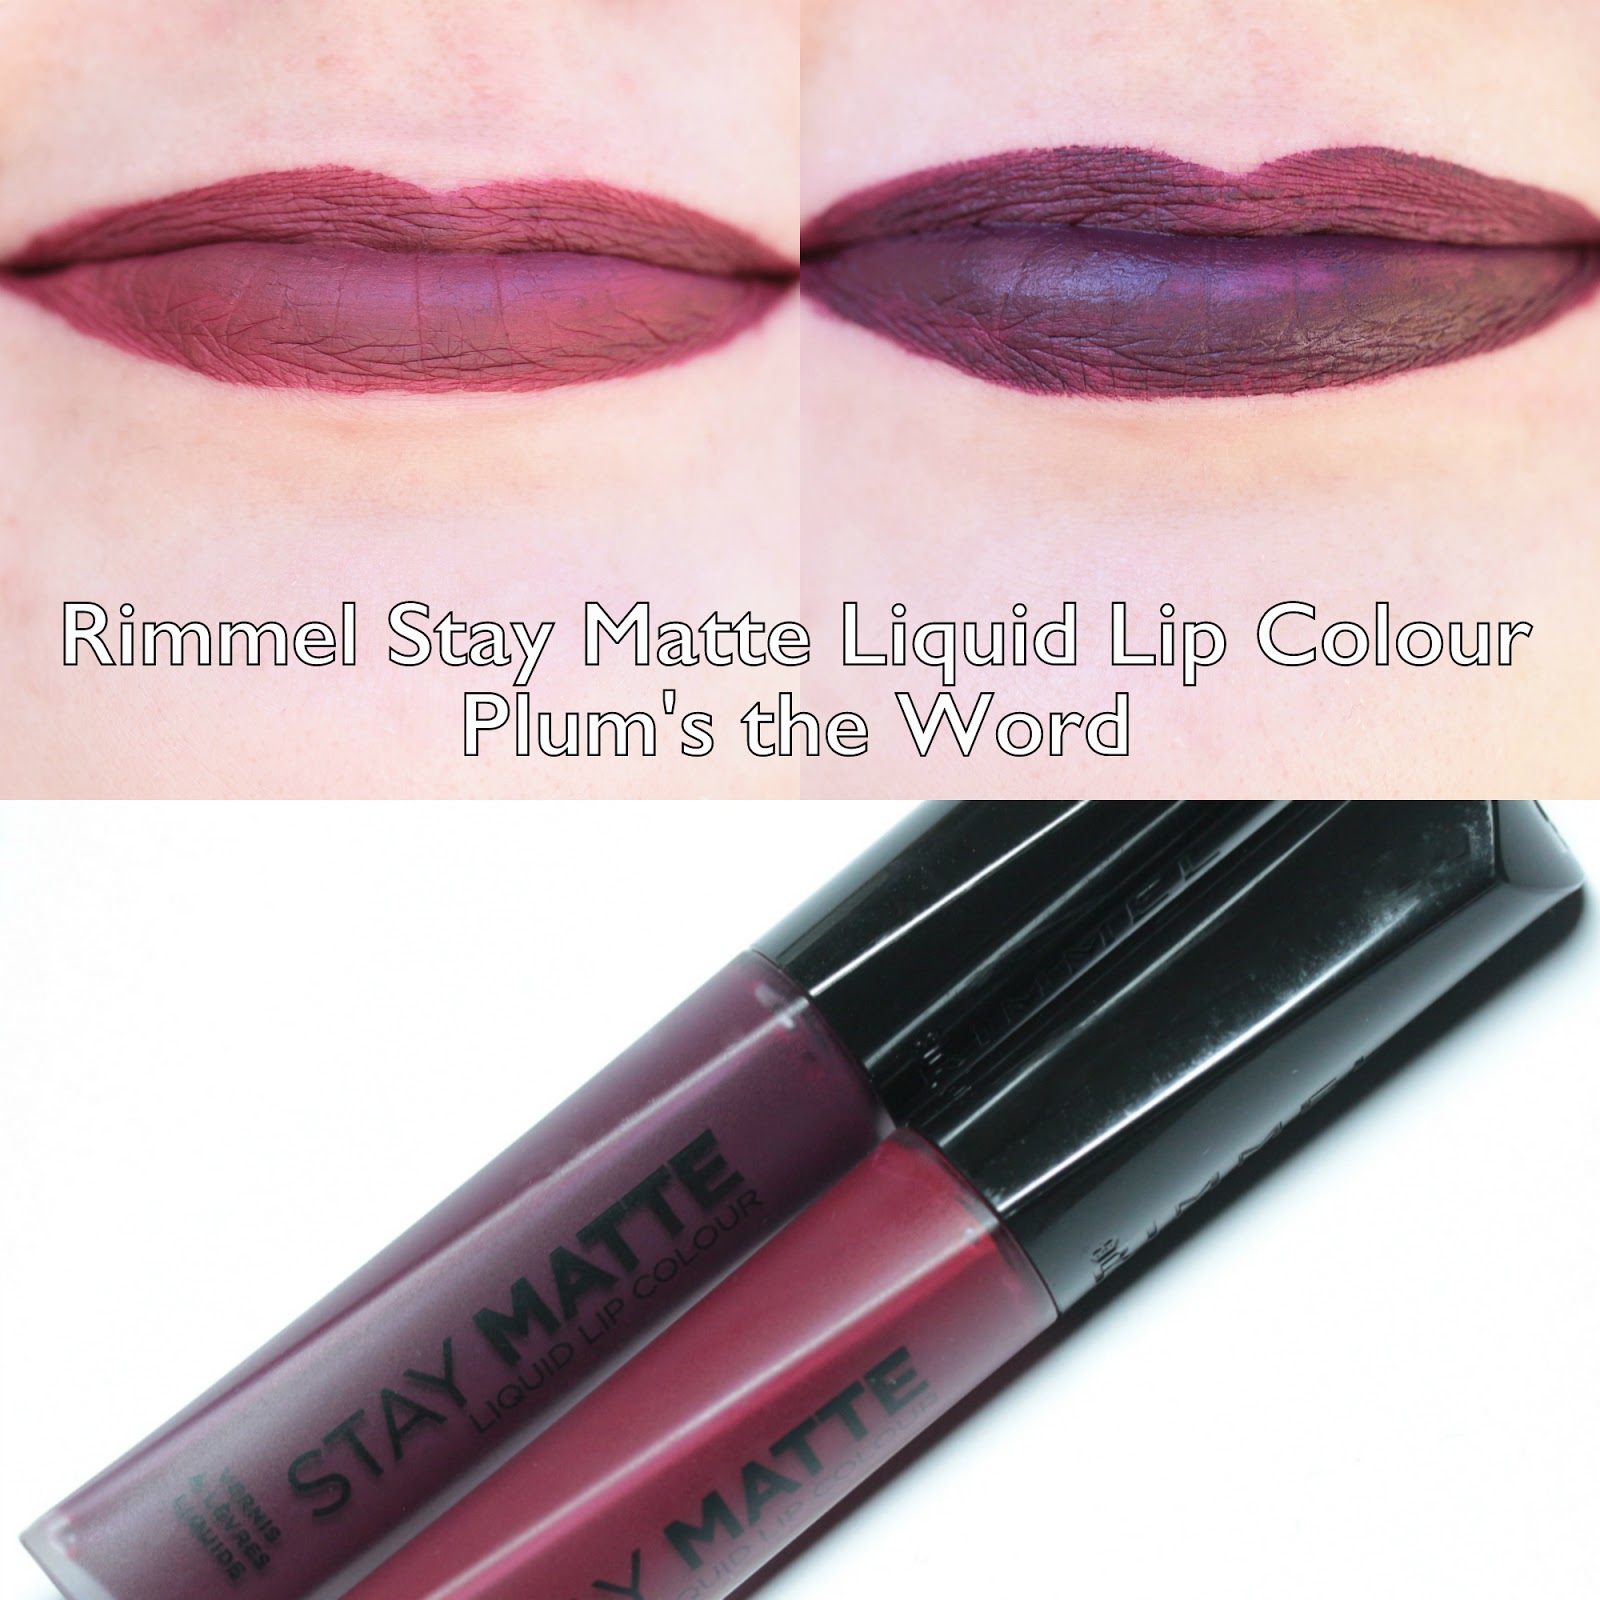 native Duizeligheid Boek The Polished Hippy: Rimmel Stay Matte Liquid Lip Colour Plum's the Word  Swatches and Review